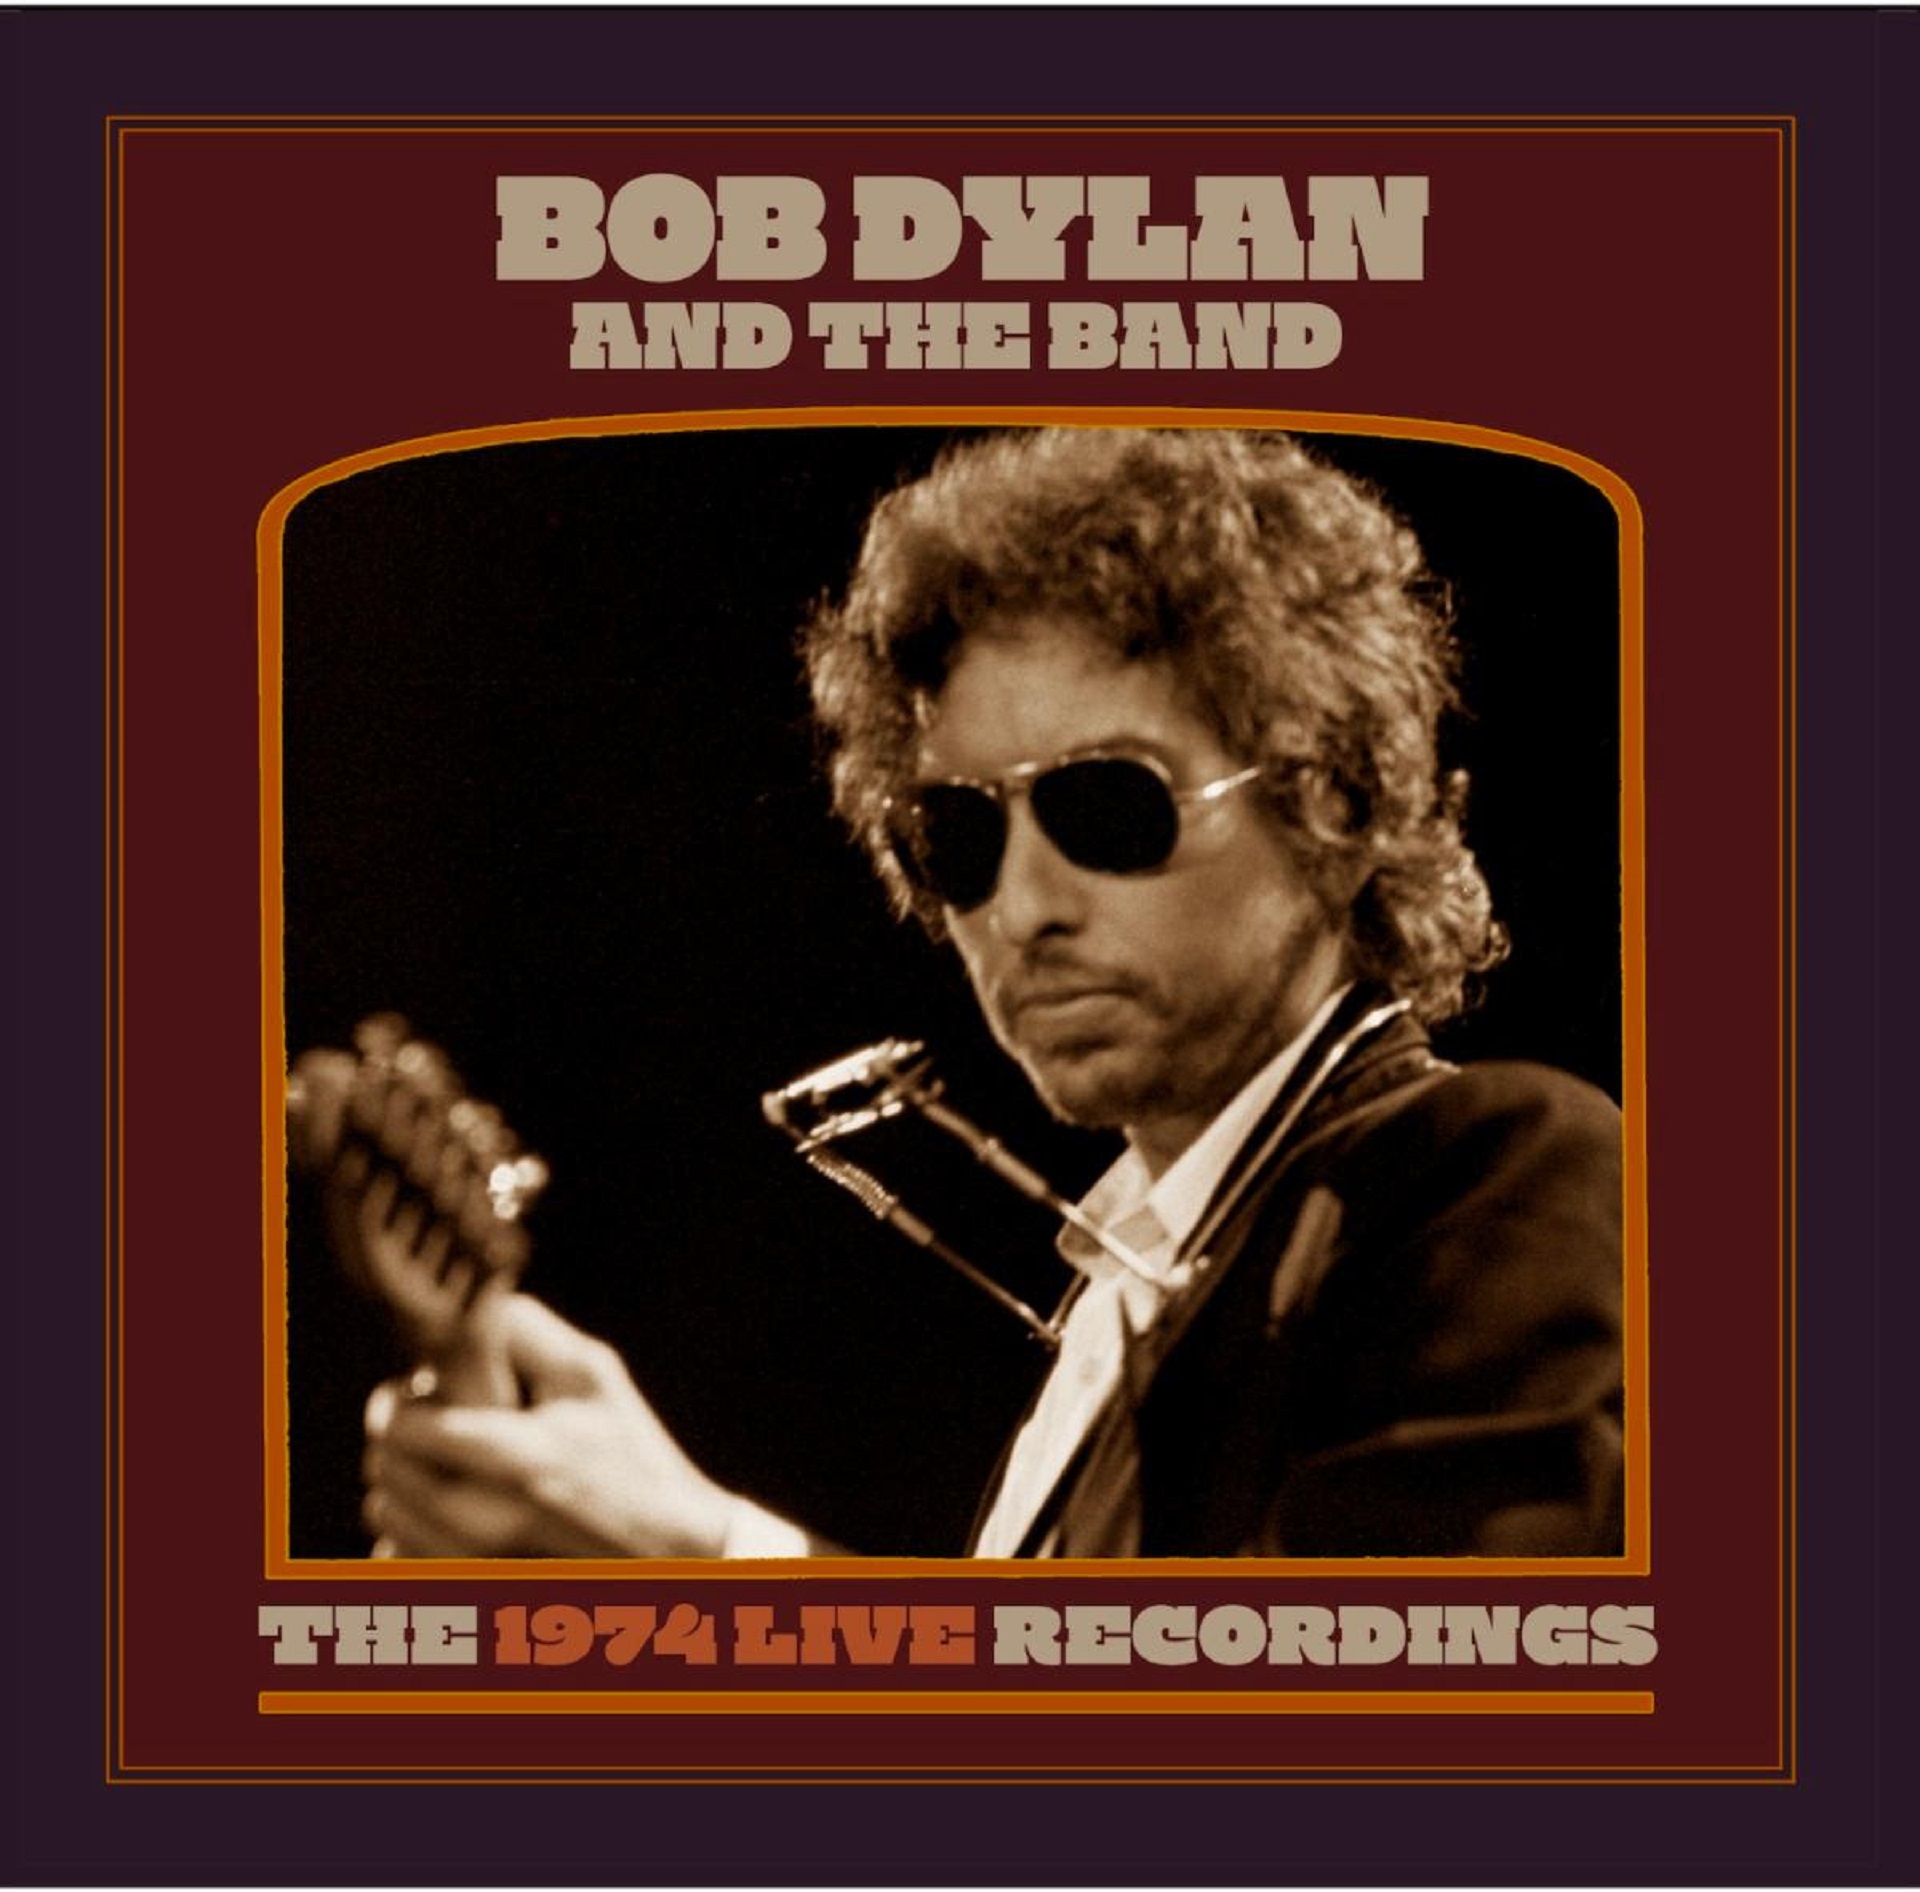 Bob Dylan - The 1974 Live Recordings - New 431-Track Collection - Out Sept 20 via Columbia Records/Legacy Recordings